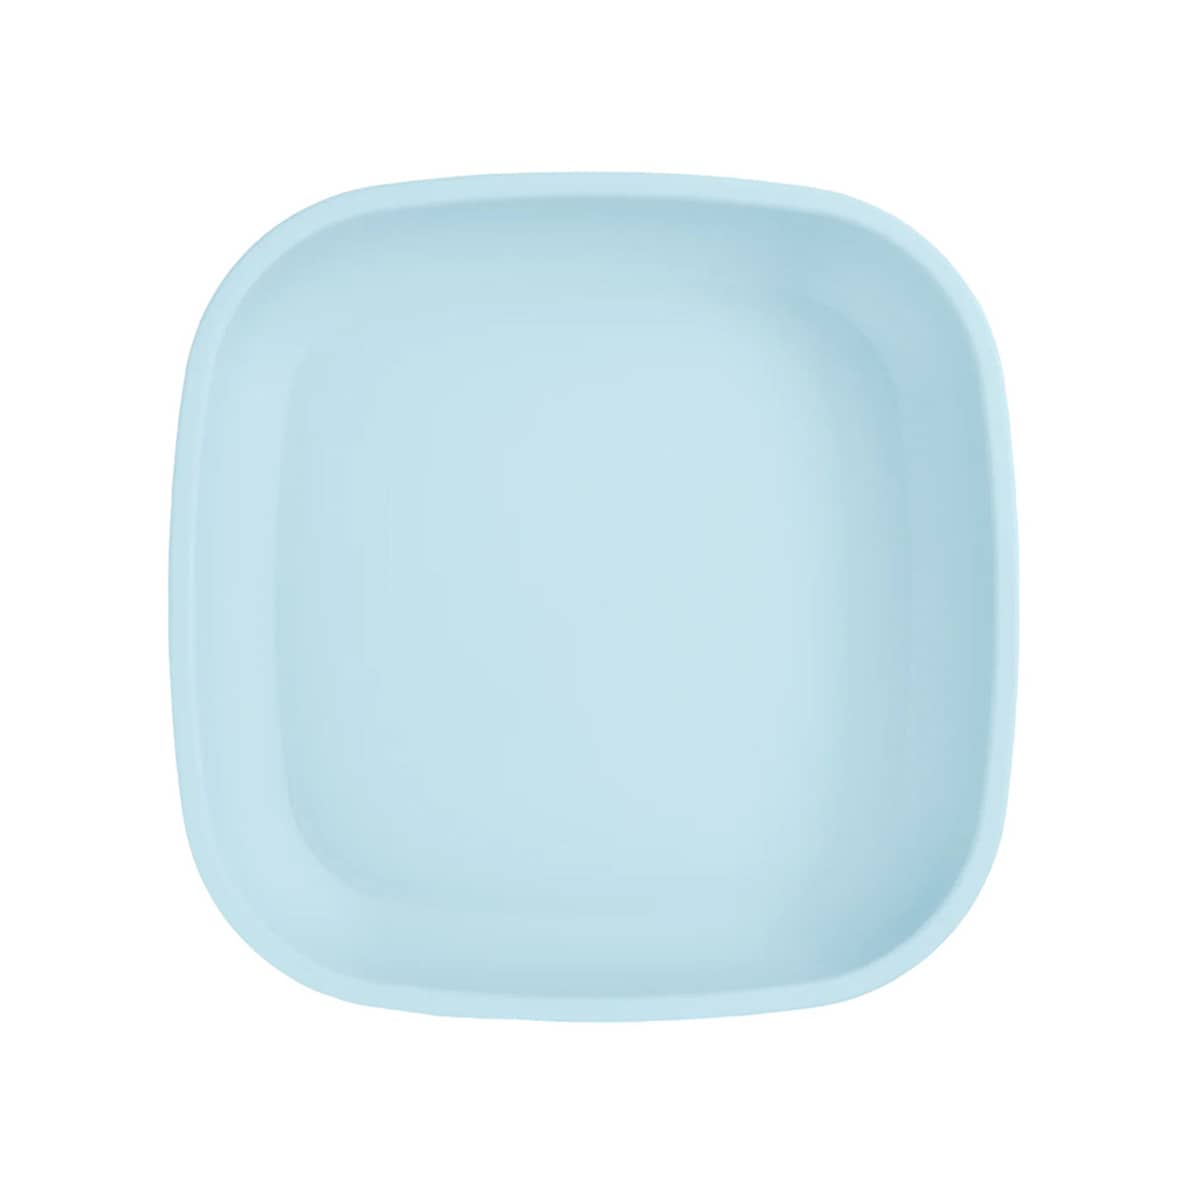 Re-Play Recycled Flat Plate - Naturals Collection - Ice Blue